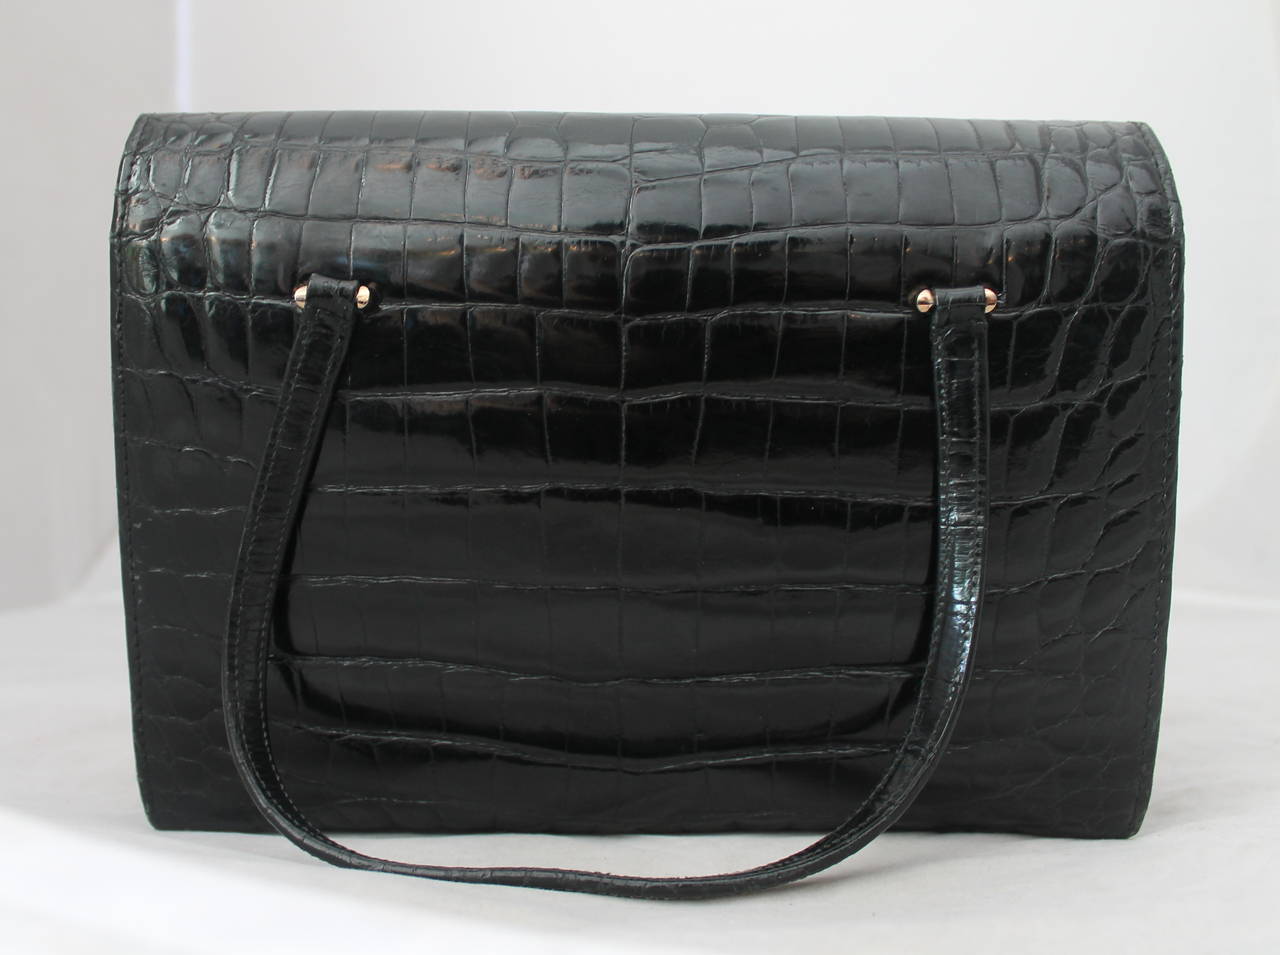 1950's Vintage Cilli Black Crocodile Accordian Handbag. This bag is in excellent vintage condition with very minor wear to the outside but some wear to the inside. 

Measurements:
Length- 7.5